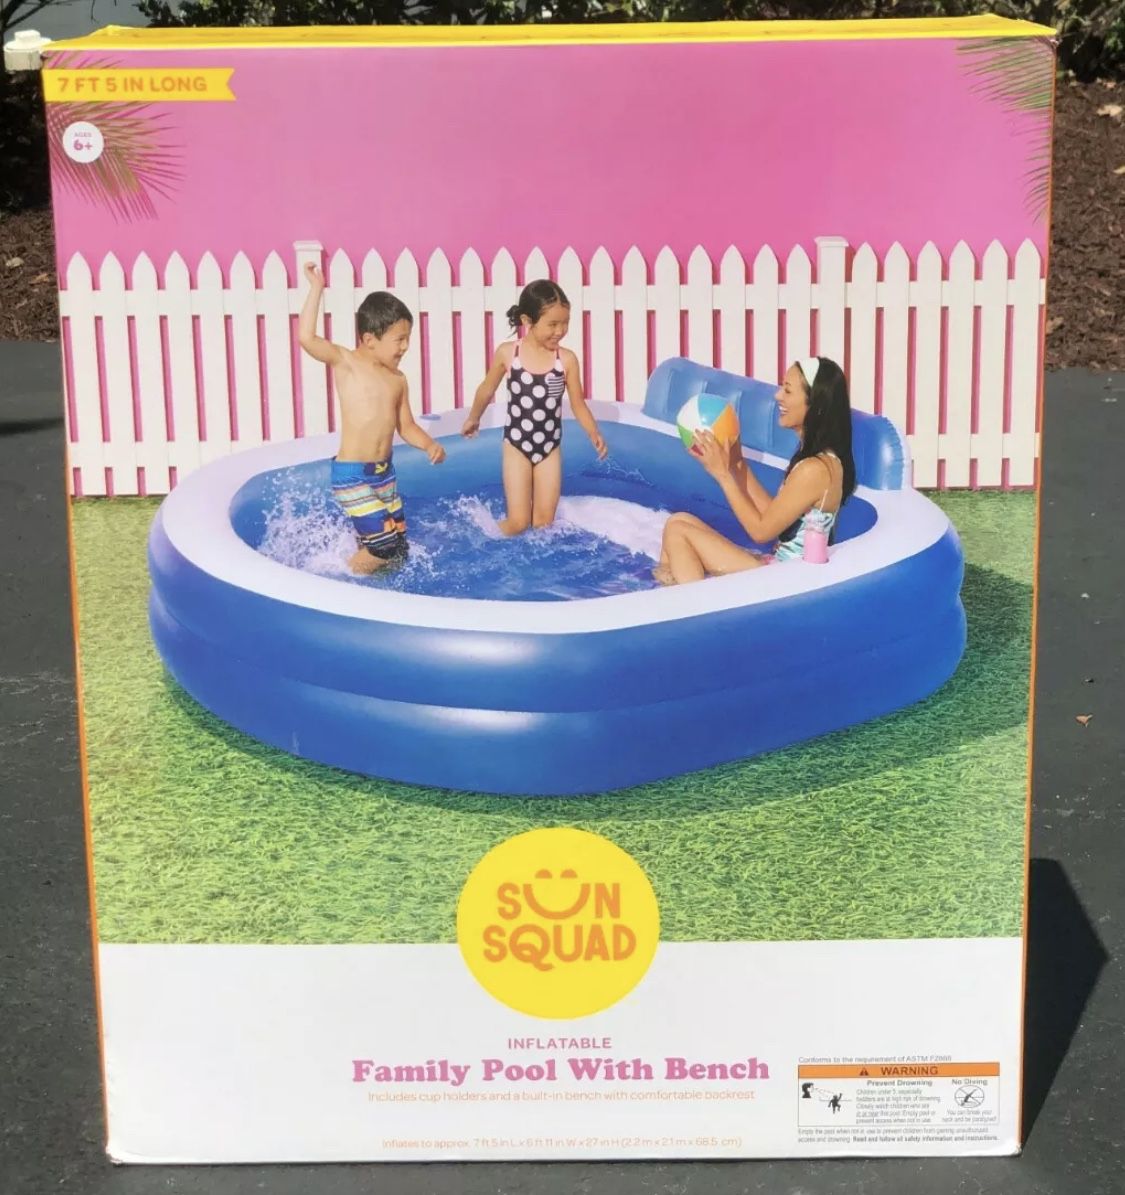 SUN SQUAD Inflatable Family Pool With Bench